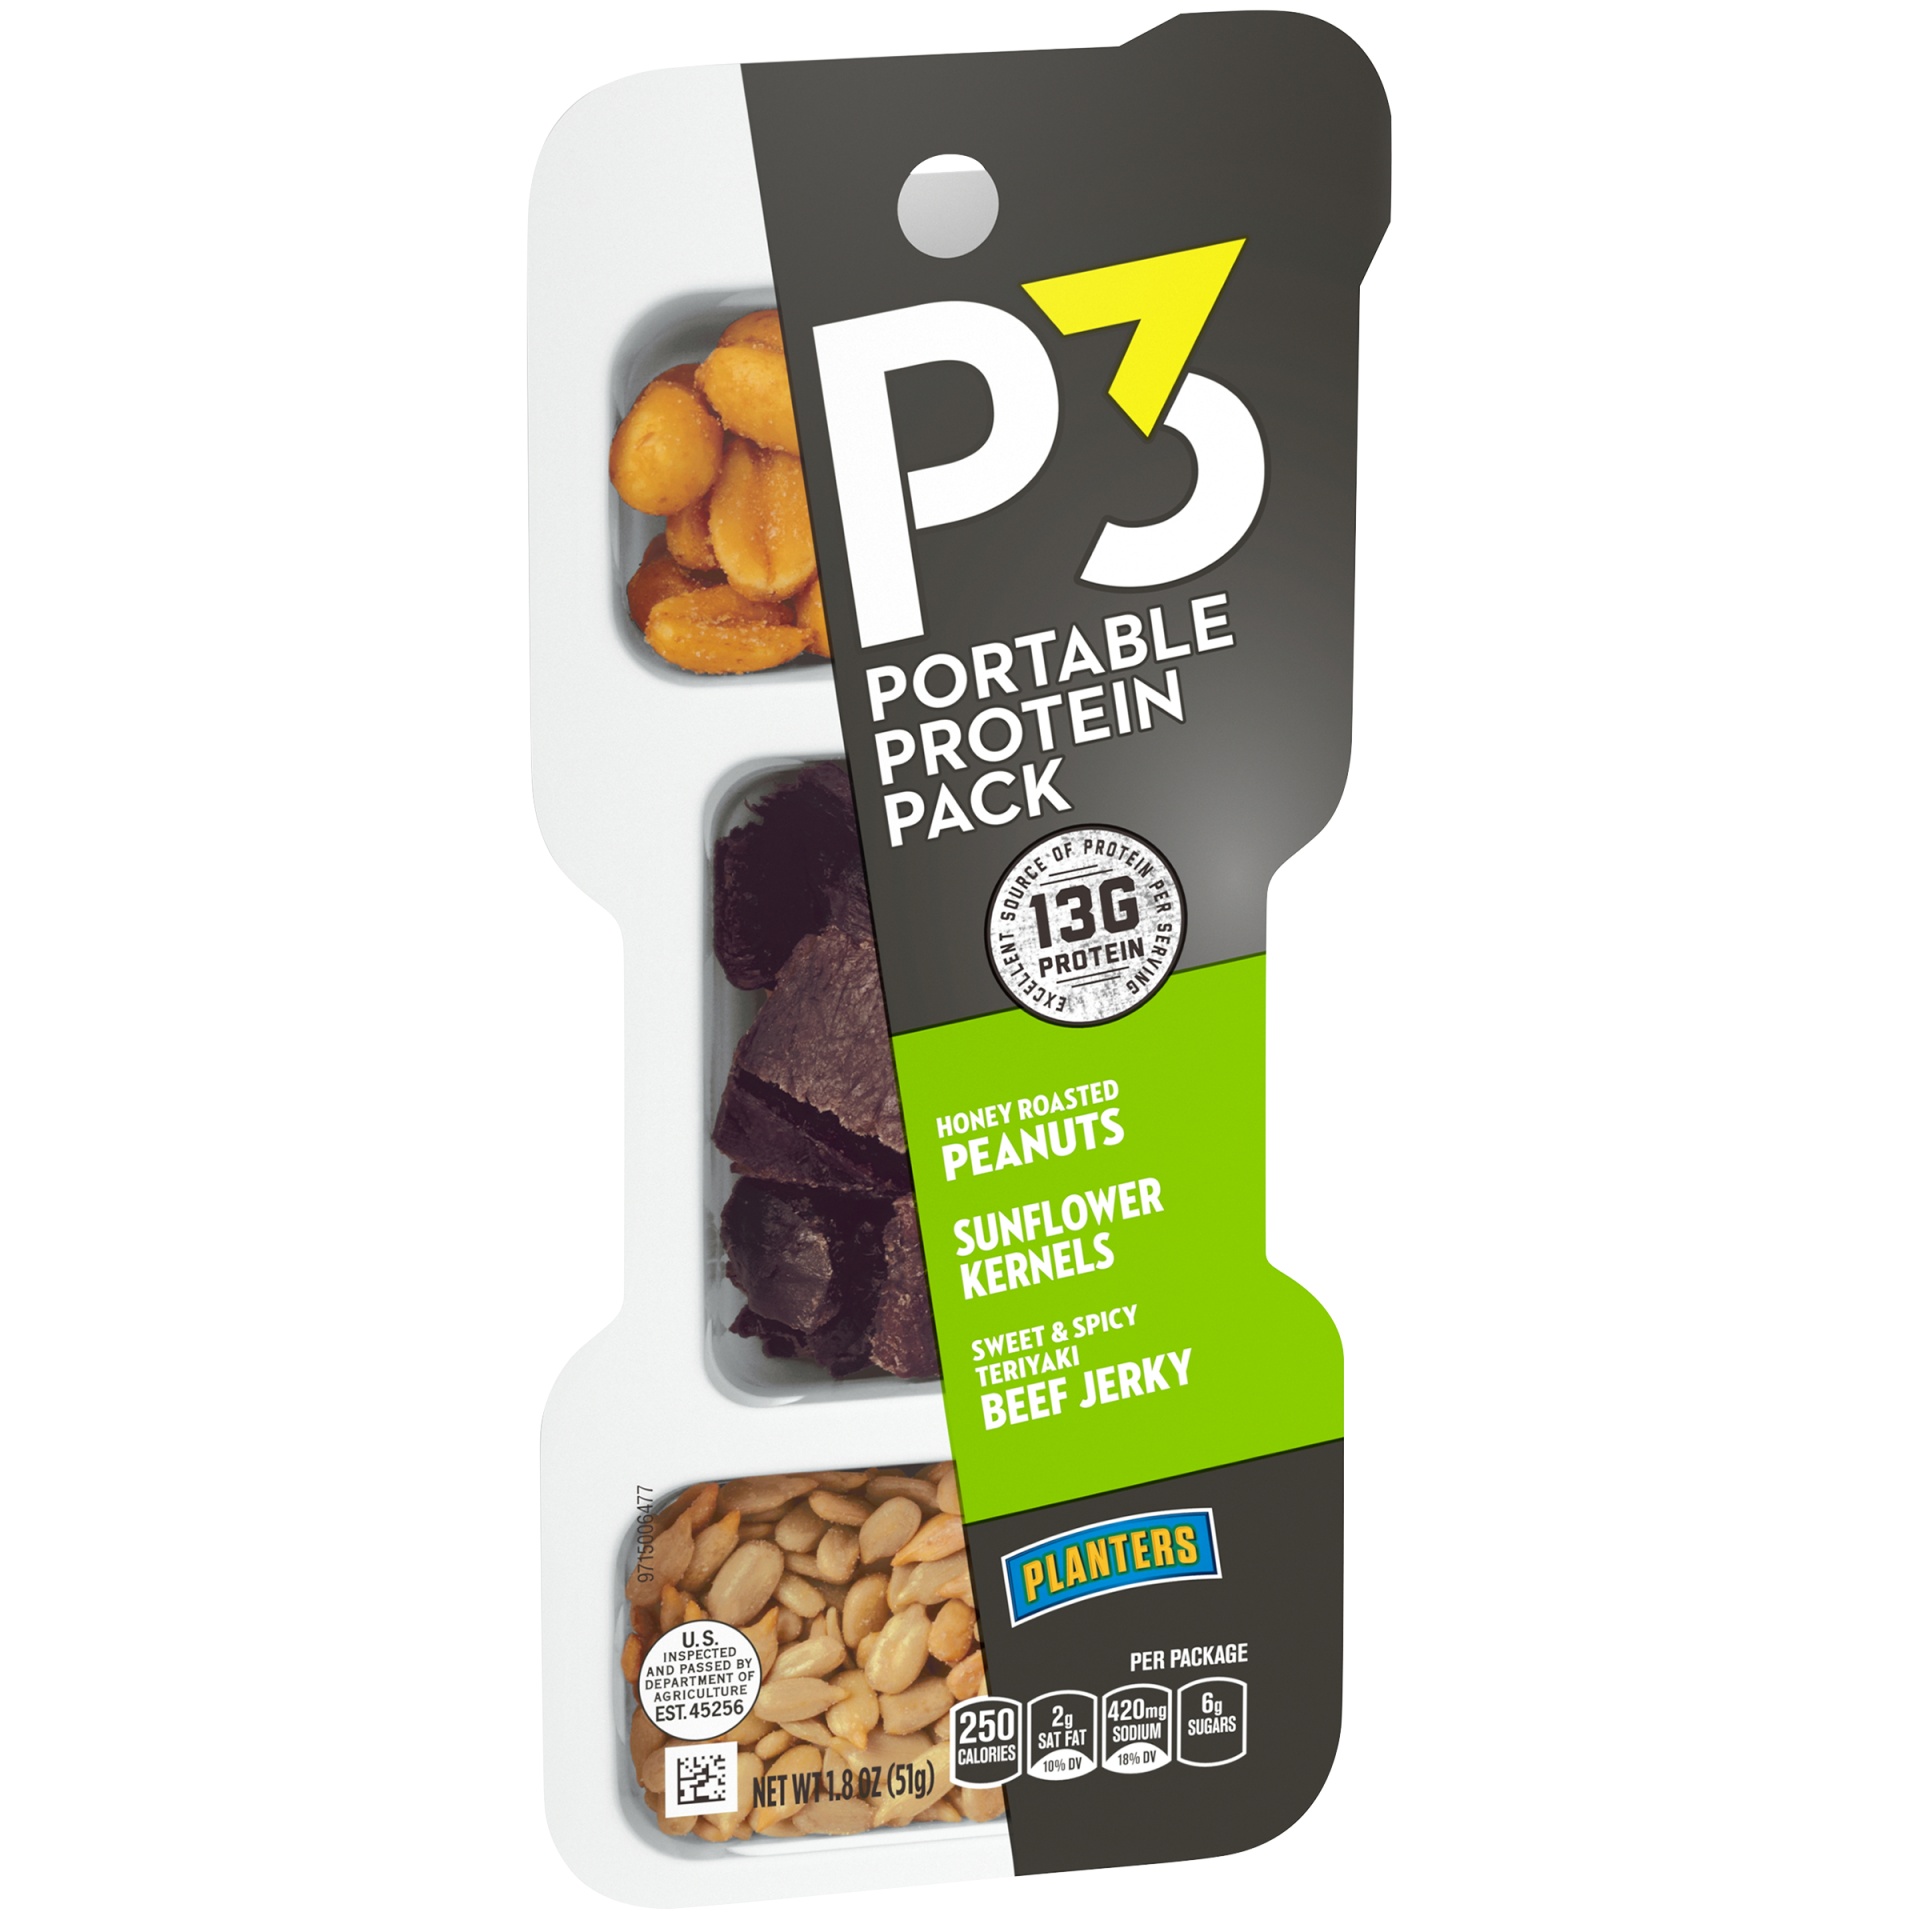 slide 2 of 6, P3 Portable Protein Snack Pack with Honey Roasted Peanuts, Sunflower Kernels & Teriyaki Beef Jerky Tray, 1.8 oz